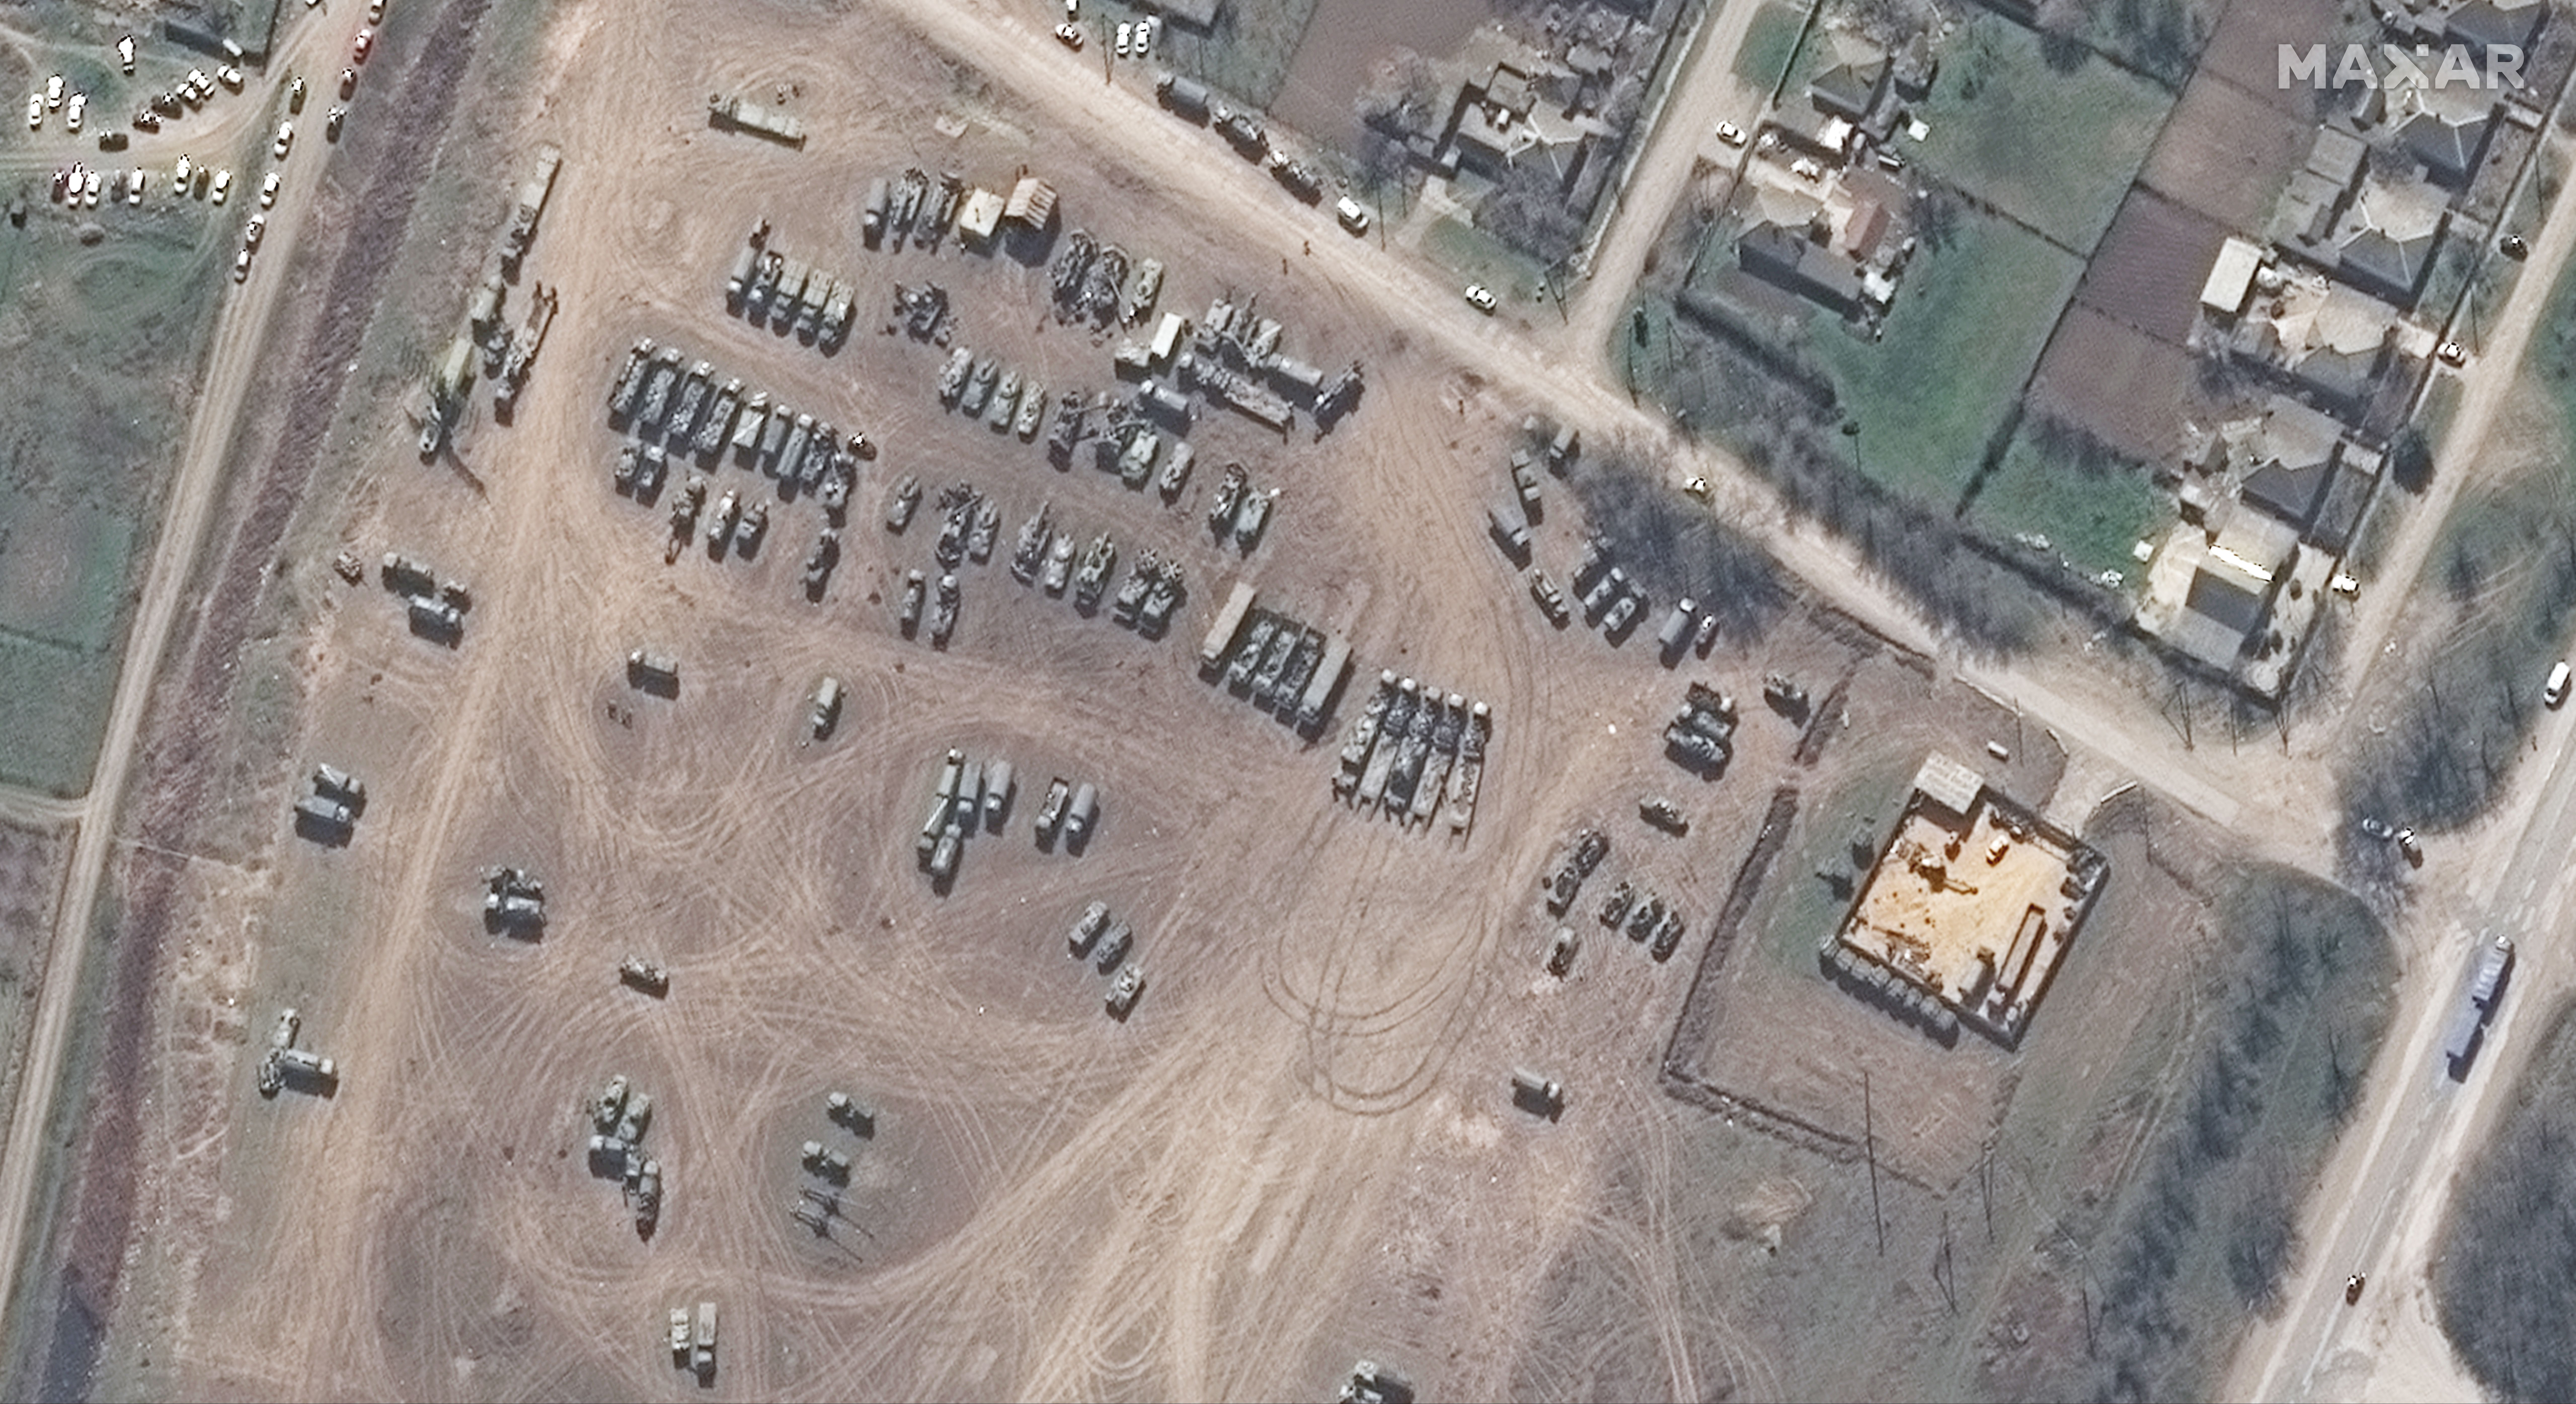 Satellite images showing Russian military equipment in Dzhankoy, Crimea, taken on April 12.